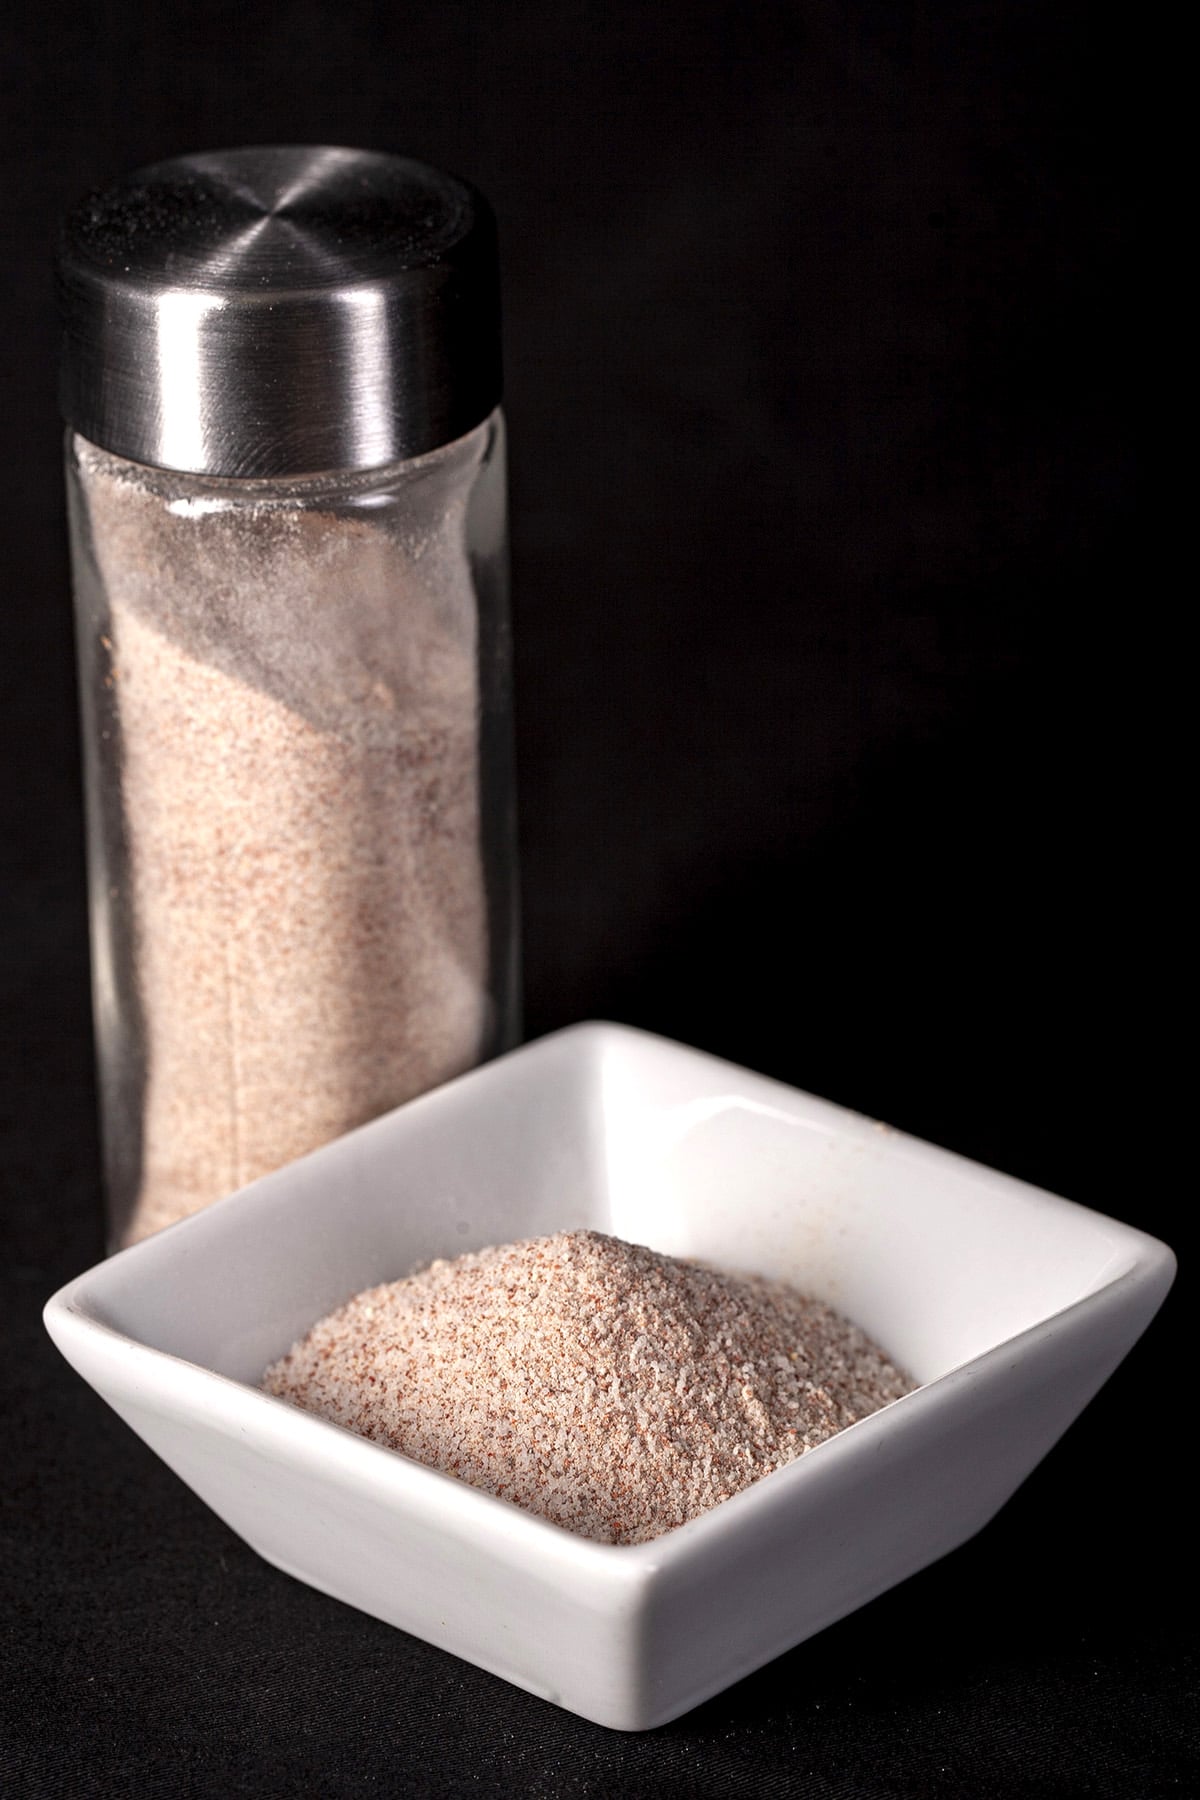 A small, square shaped white bowl with a pinkish seasoning salt mixture in it.